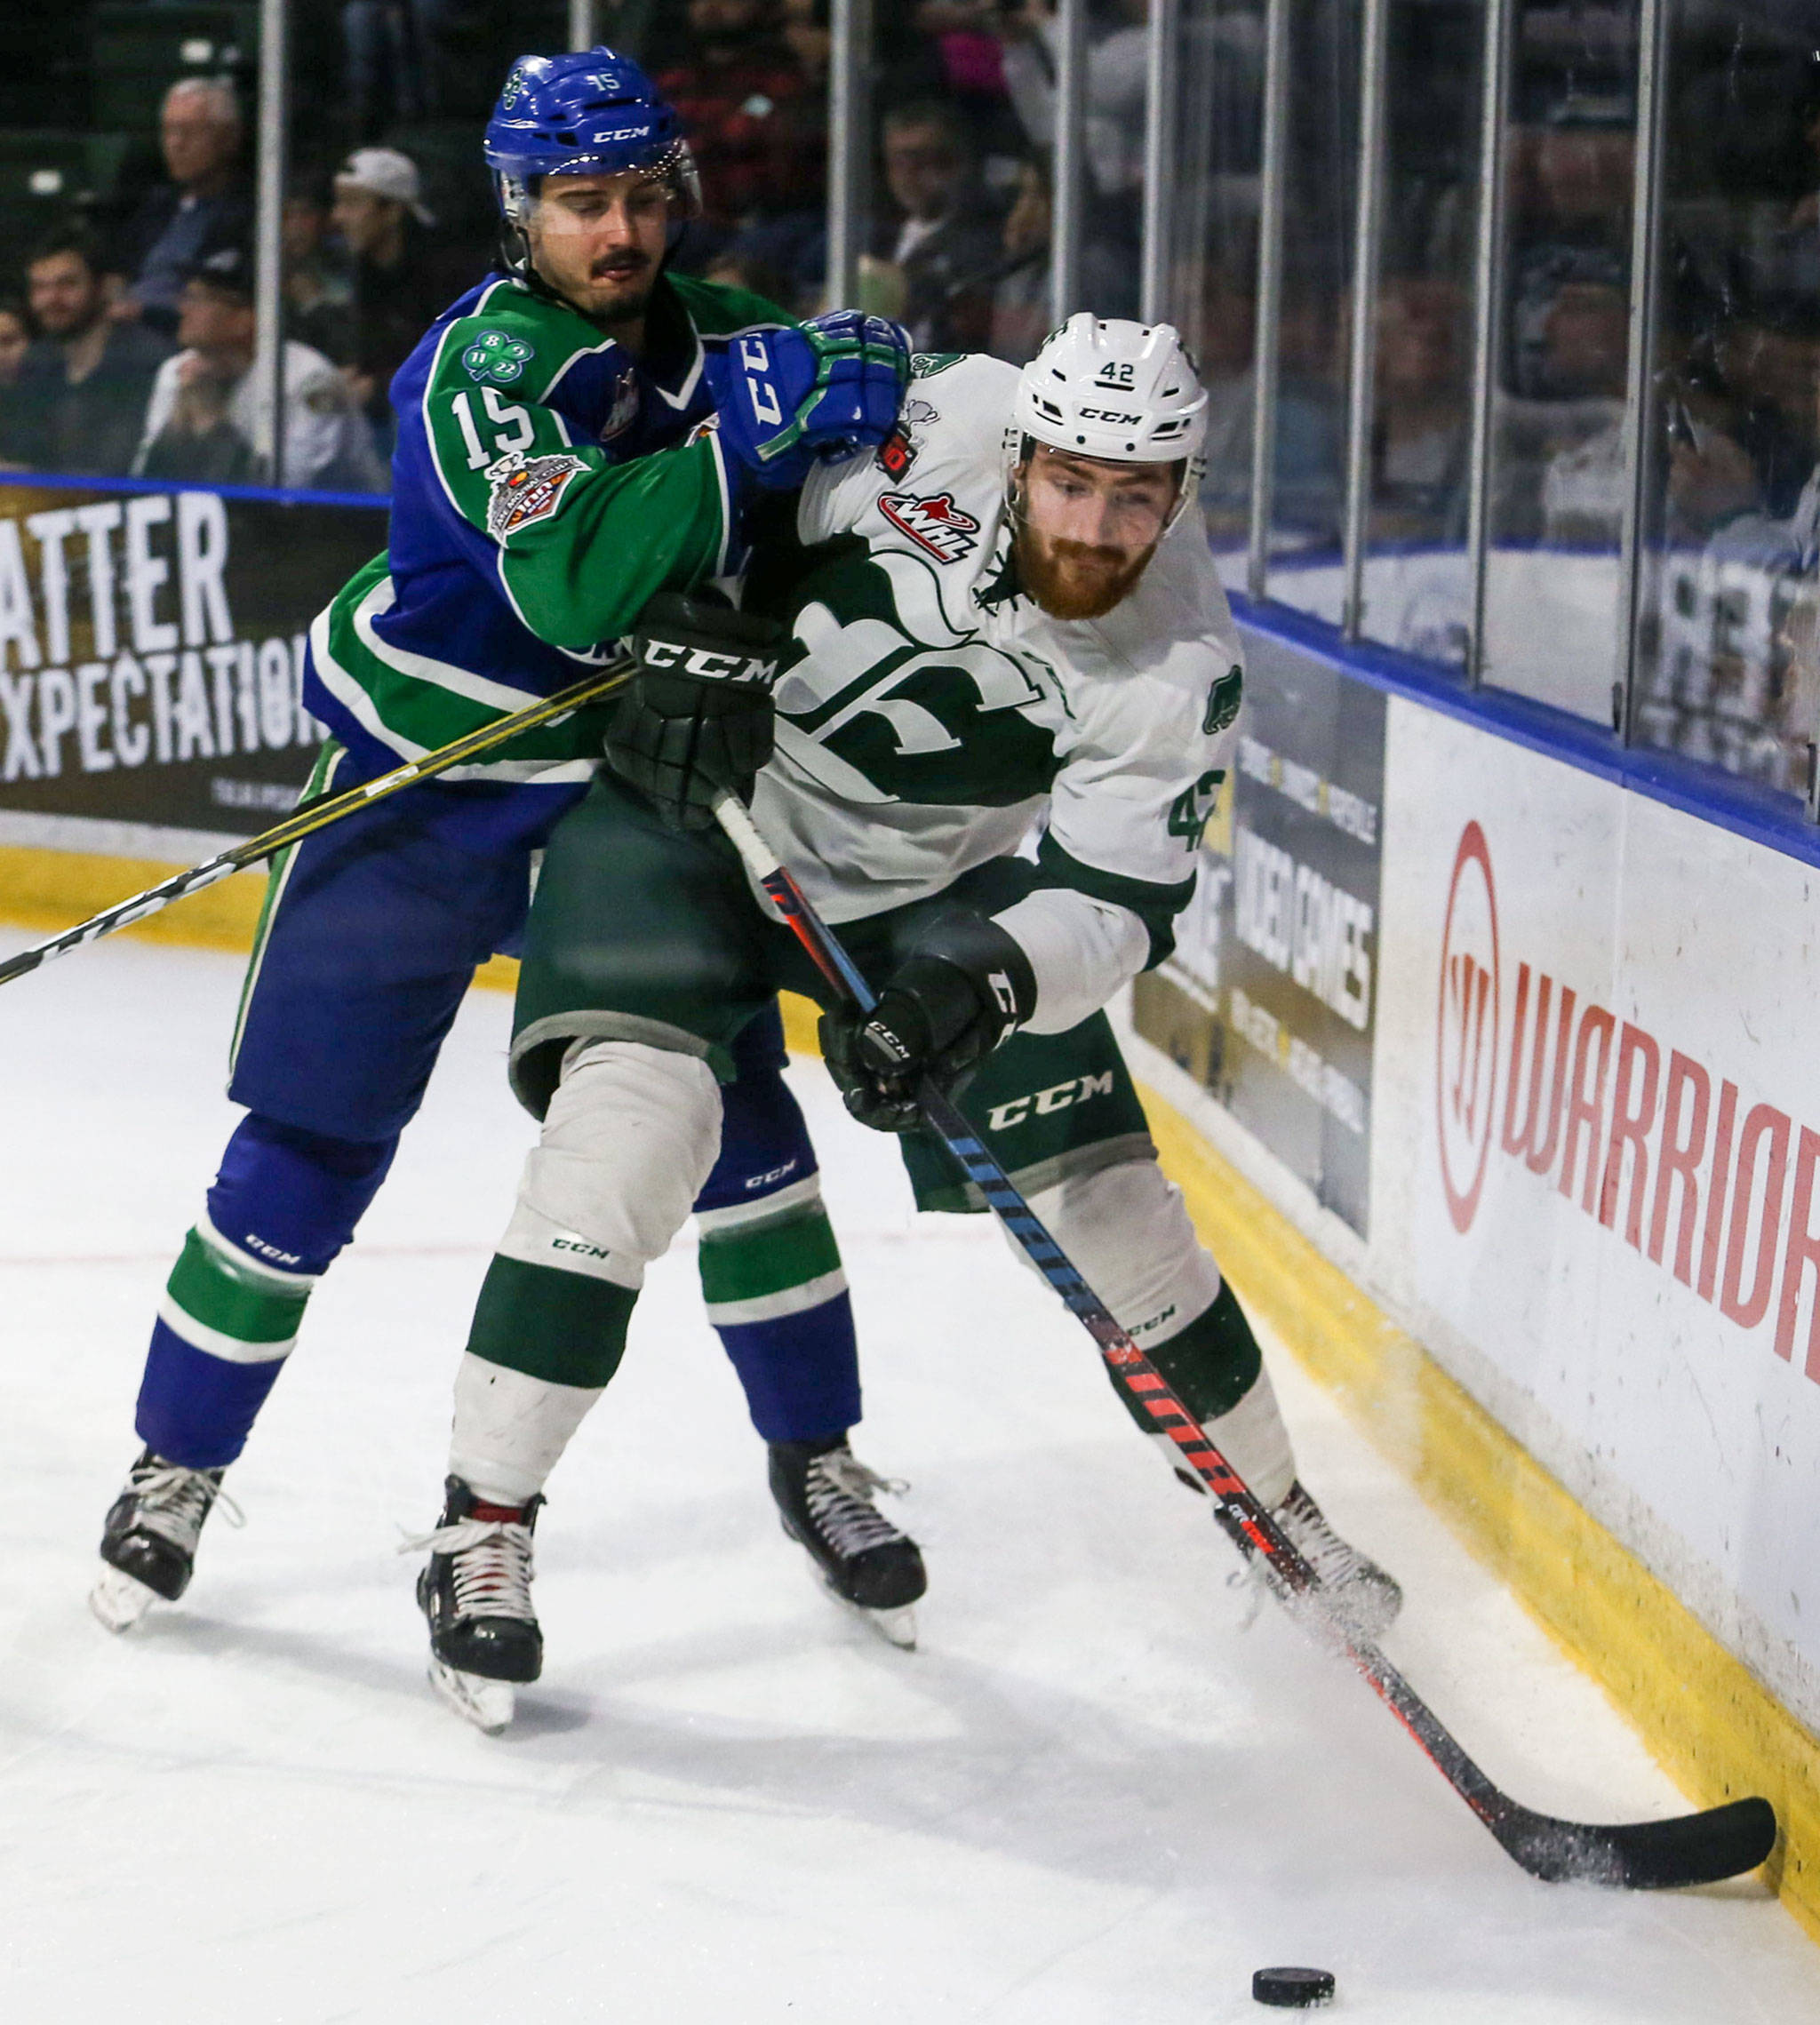 The Silvertips’ Ondrej Vala (right) battles with Swift Current’s Glenn Gawdin during Game 5 of the WHL championship series on May 11, 2018, at Angels of the Winds Arena in Everett. (Kevin Clark / The Herald)